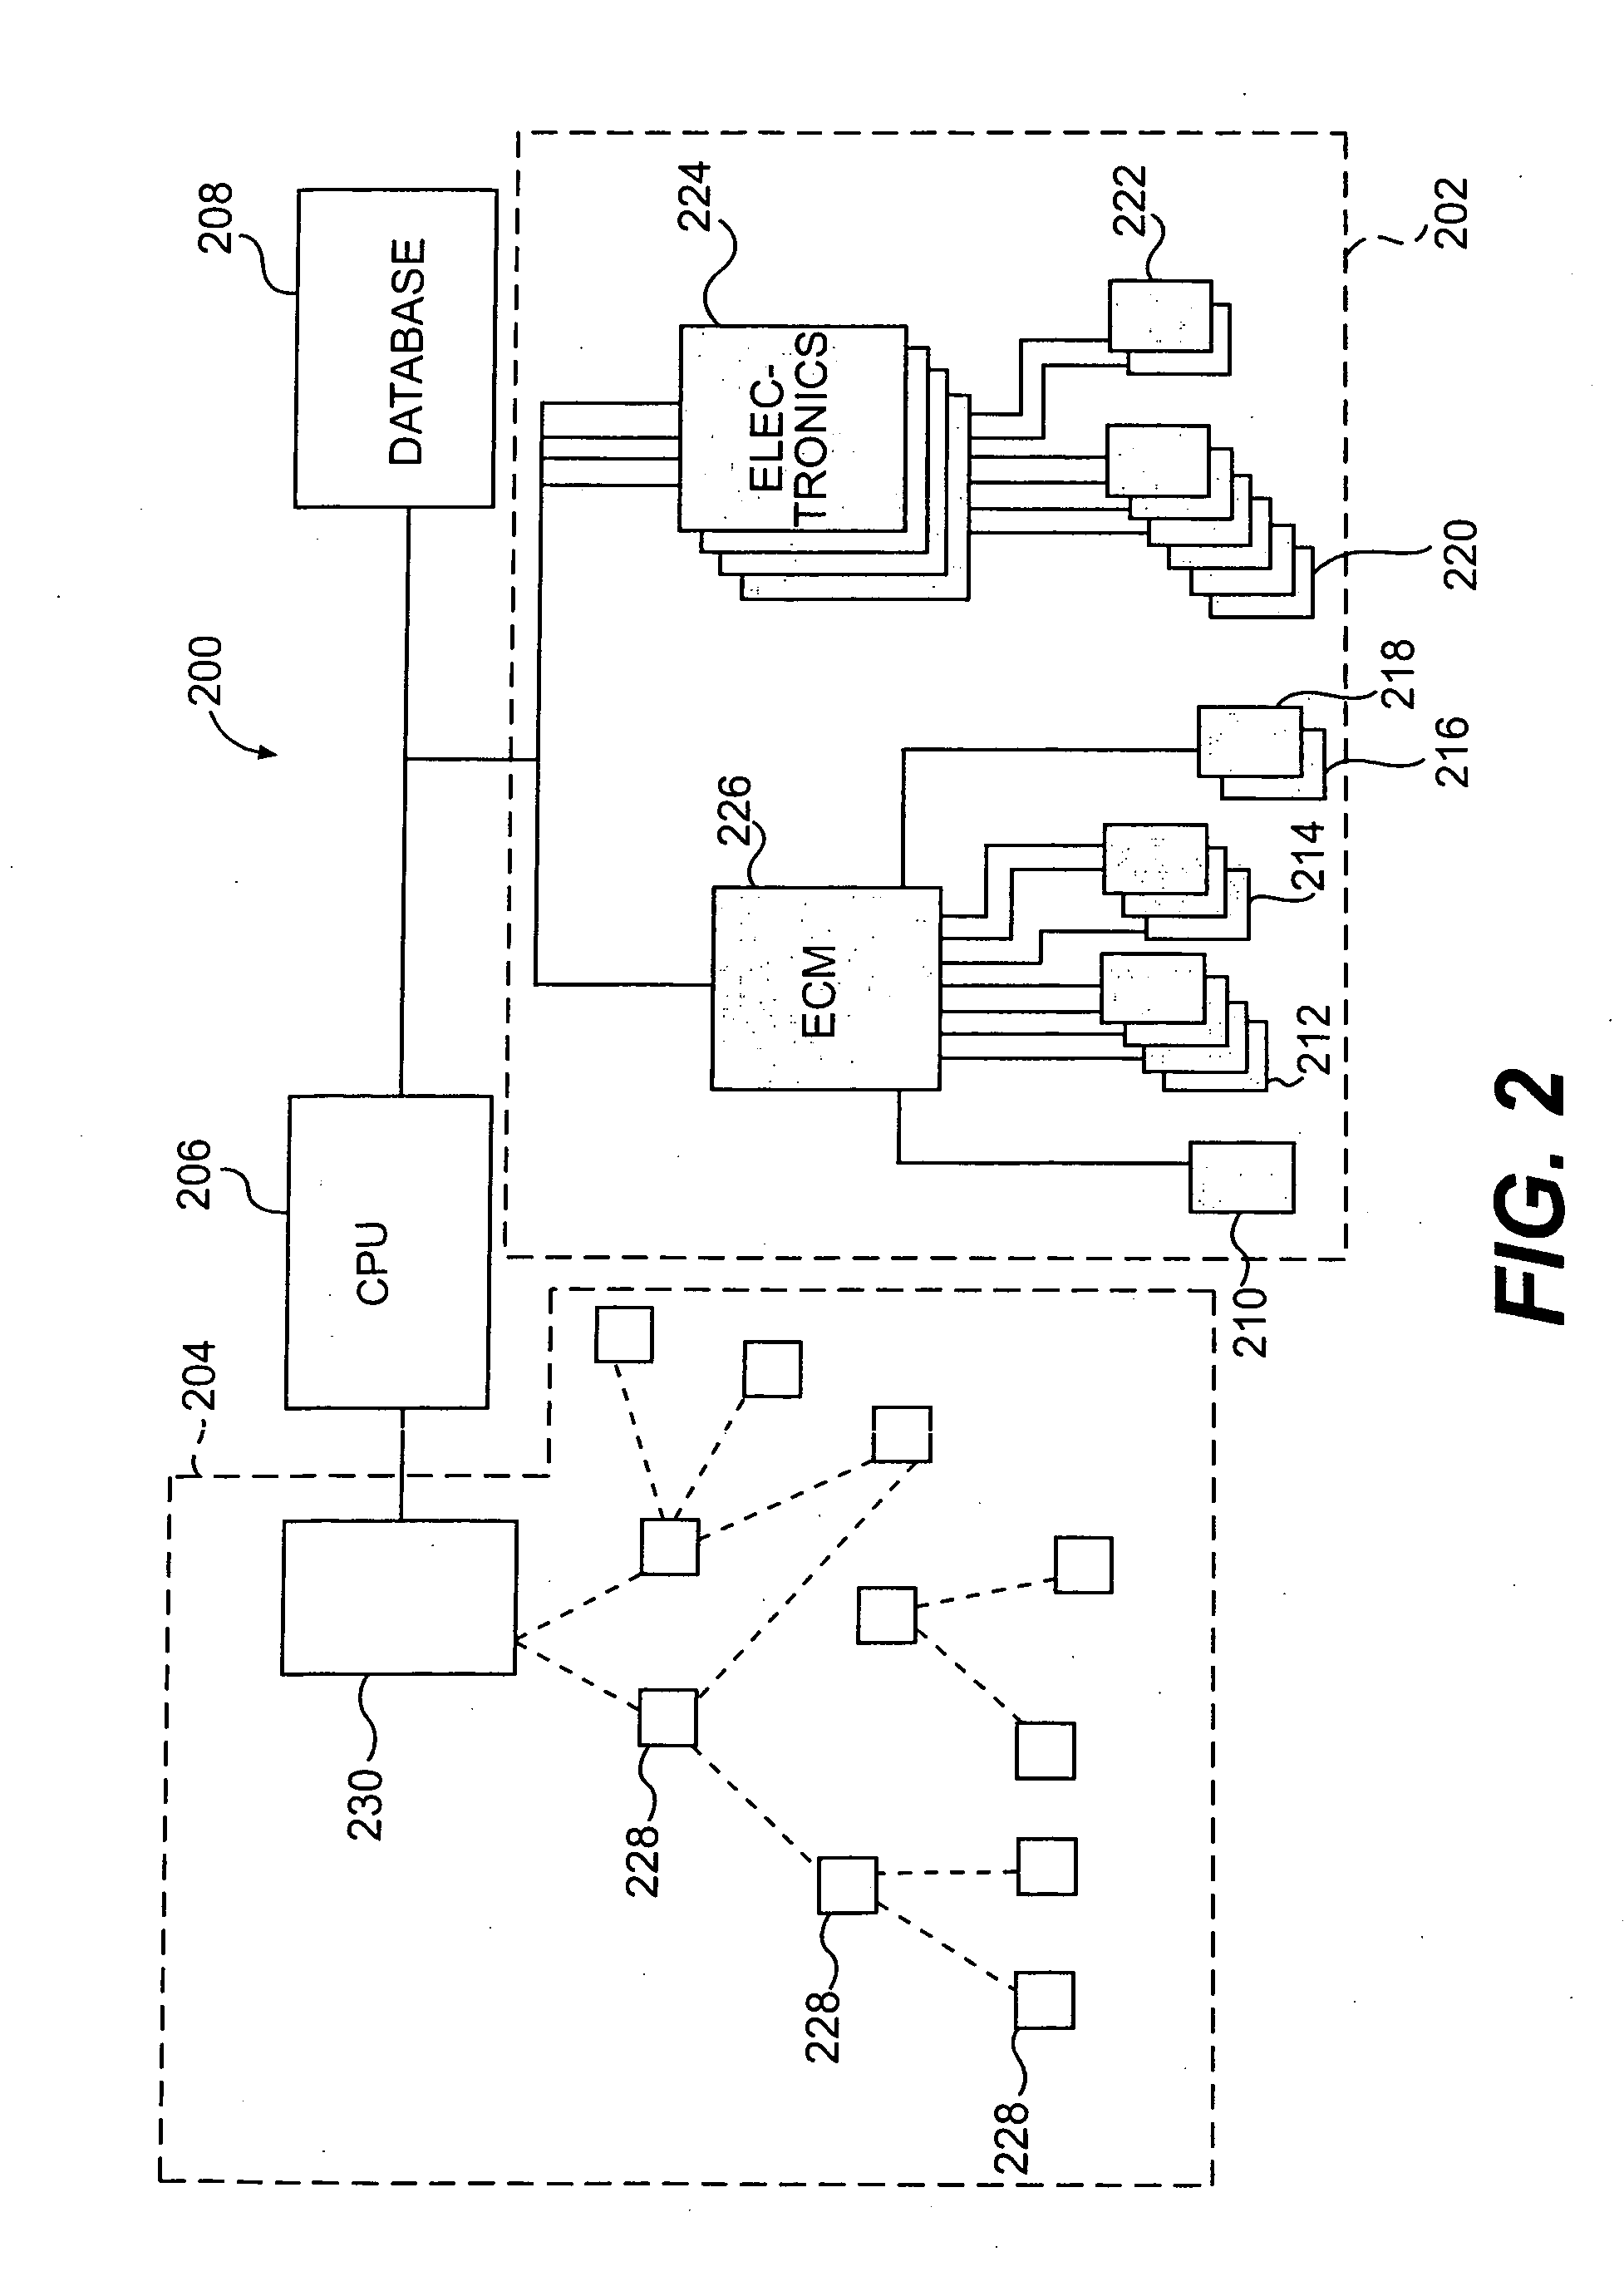 Systems and methods for maintaining load histories